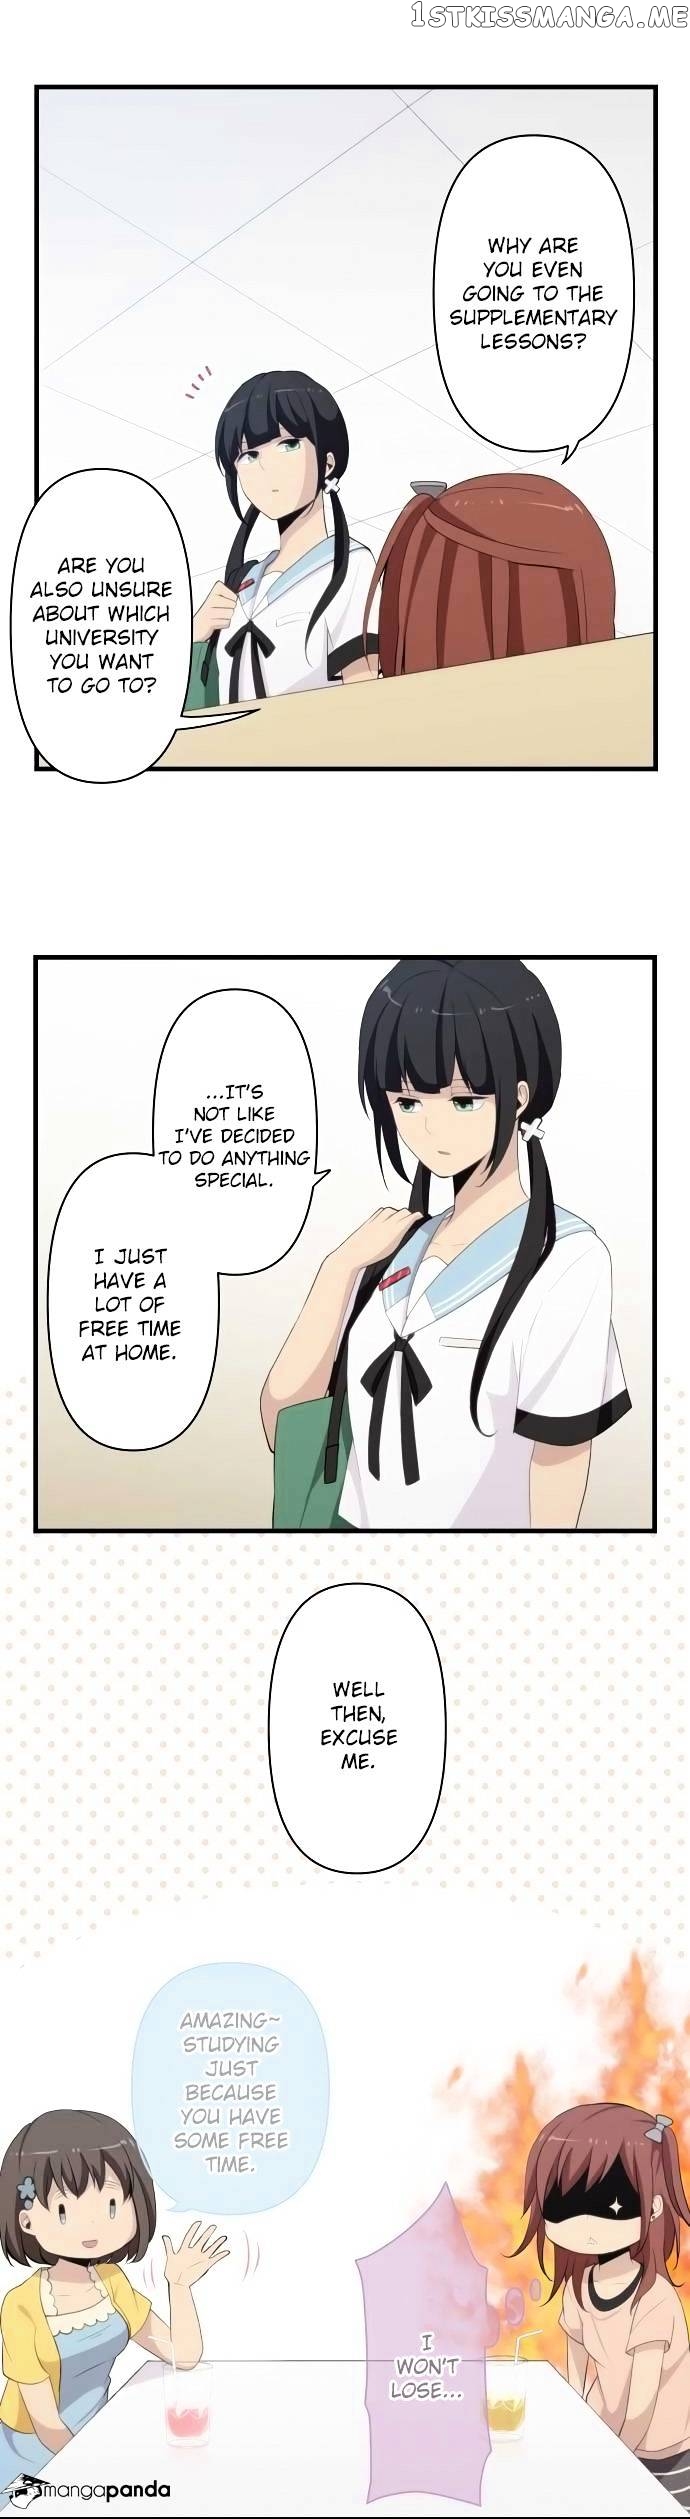 ReLIFE chapter 111 v2 - page 18